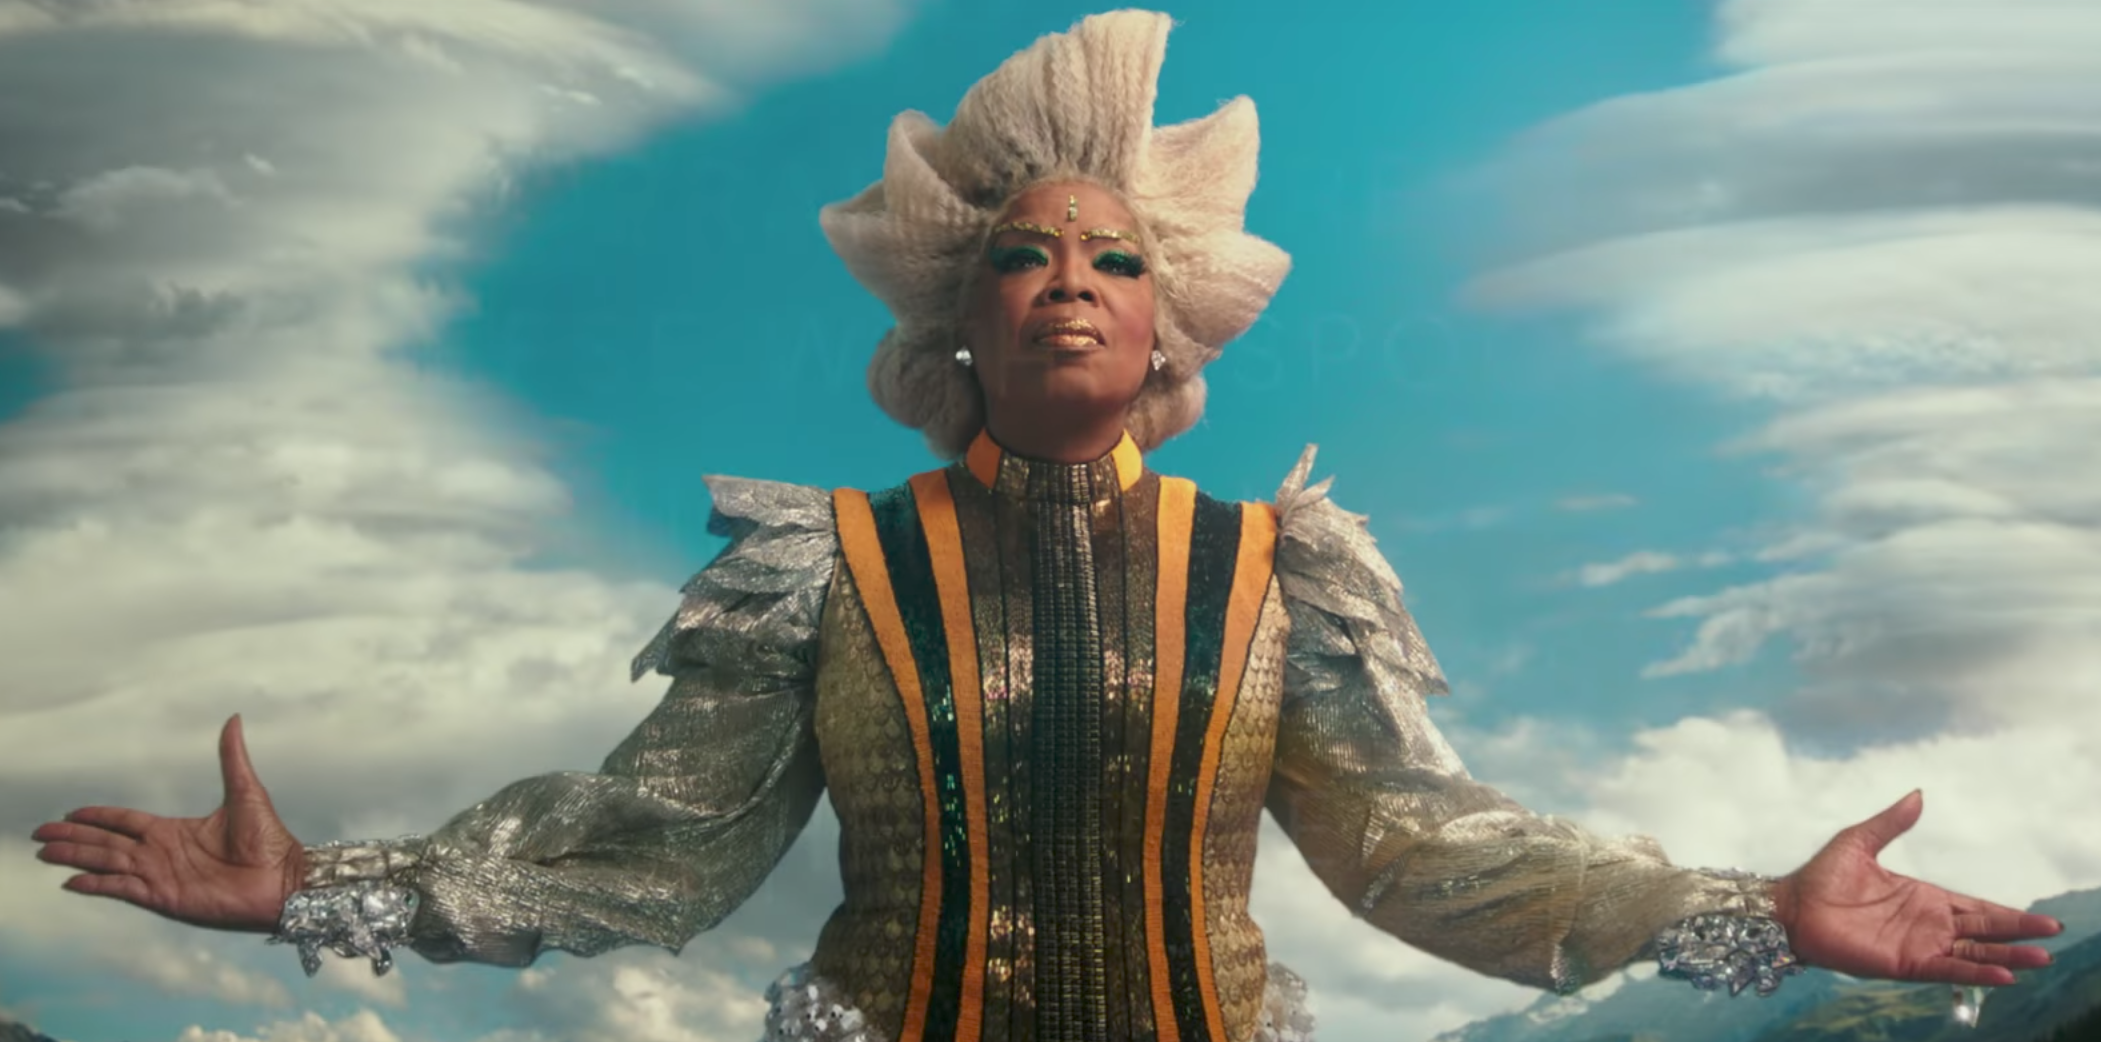 Oprah comes To life In New A Wrinkle In Time posters, Trailer
